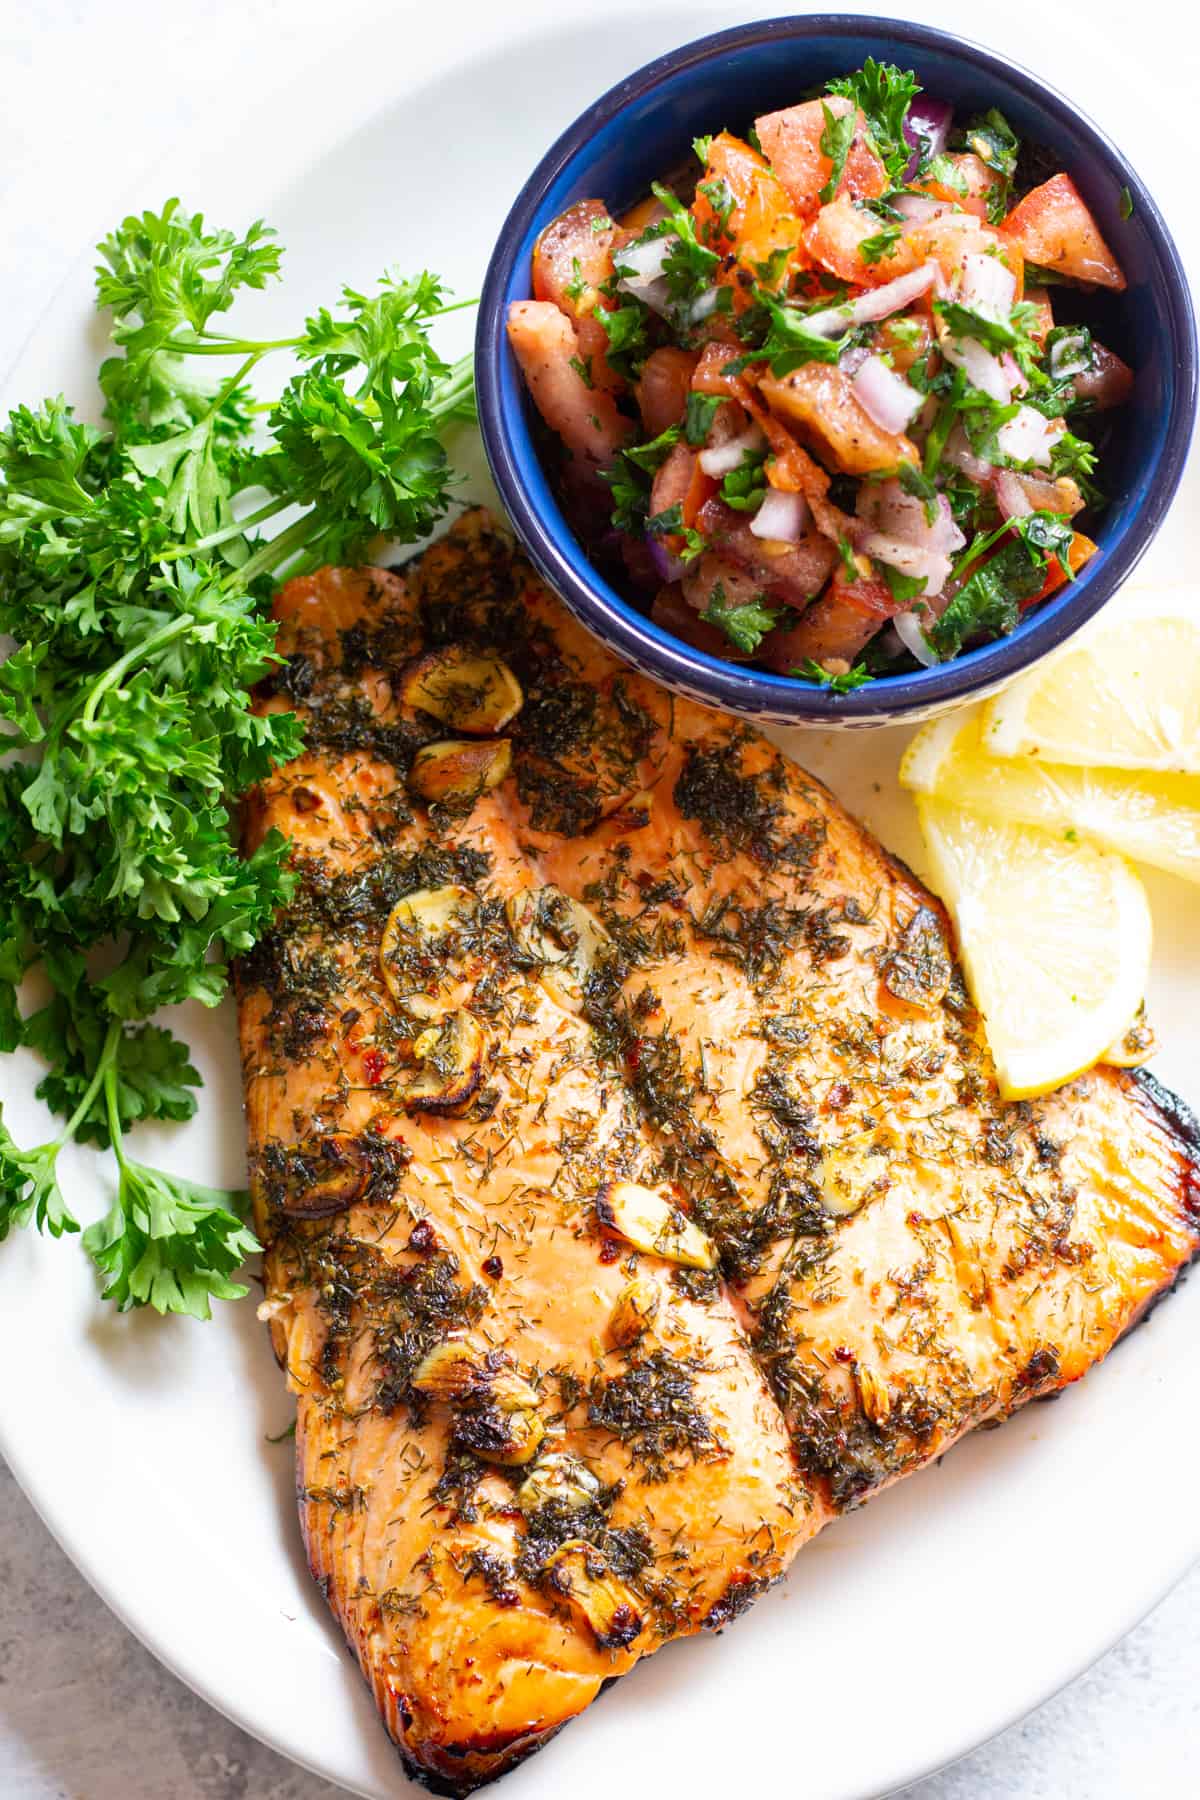 easy healthy dinner ideas - This salmon marinade features bright flavors and doesn't require a long list of ingredients. You can use this marinade for baked or grilled salmon. 
